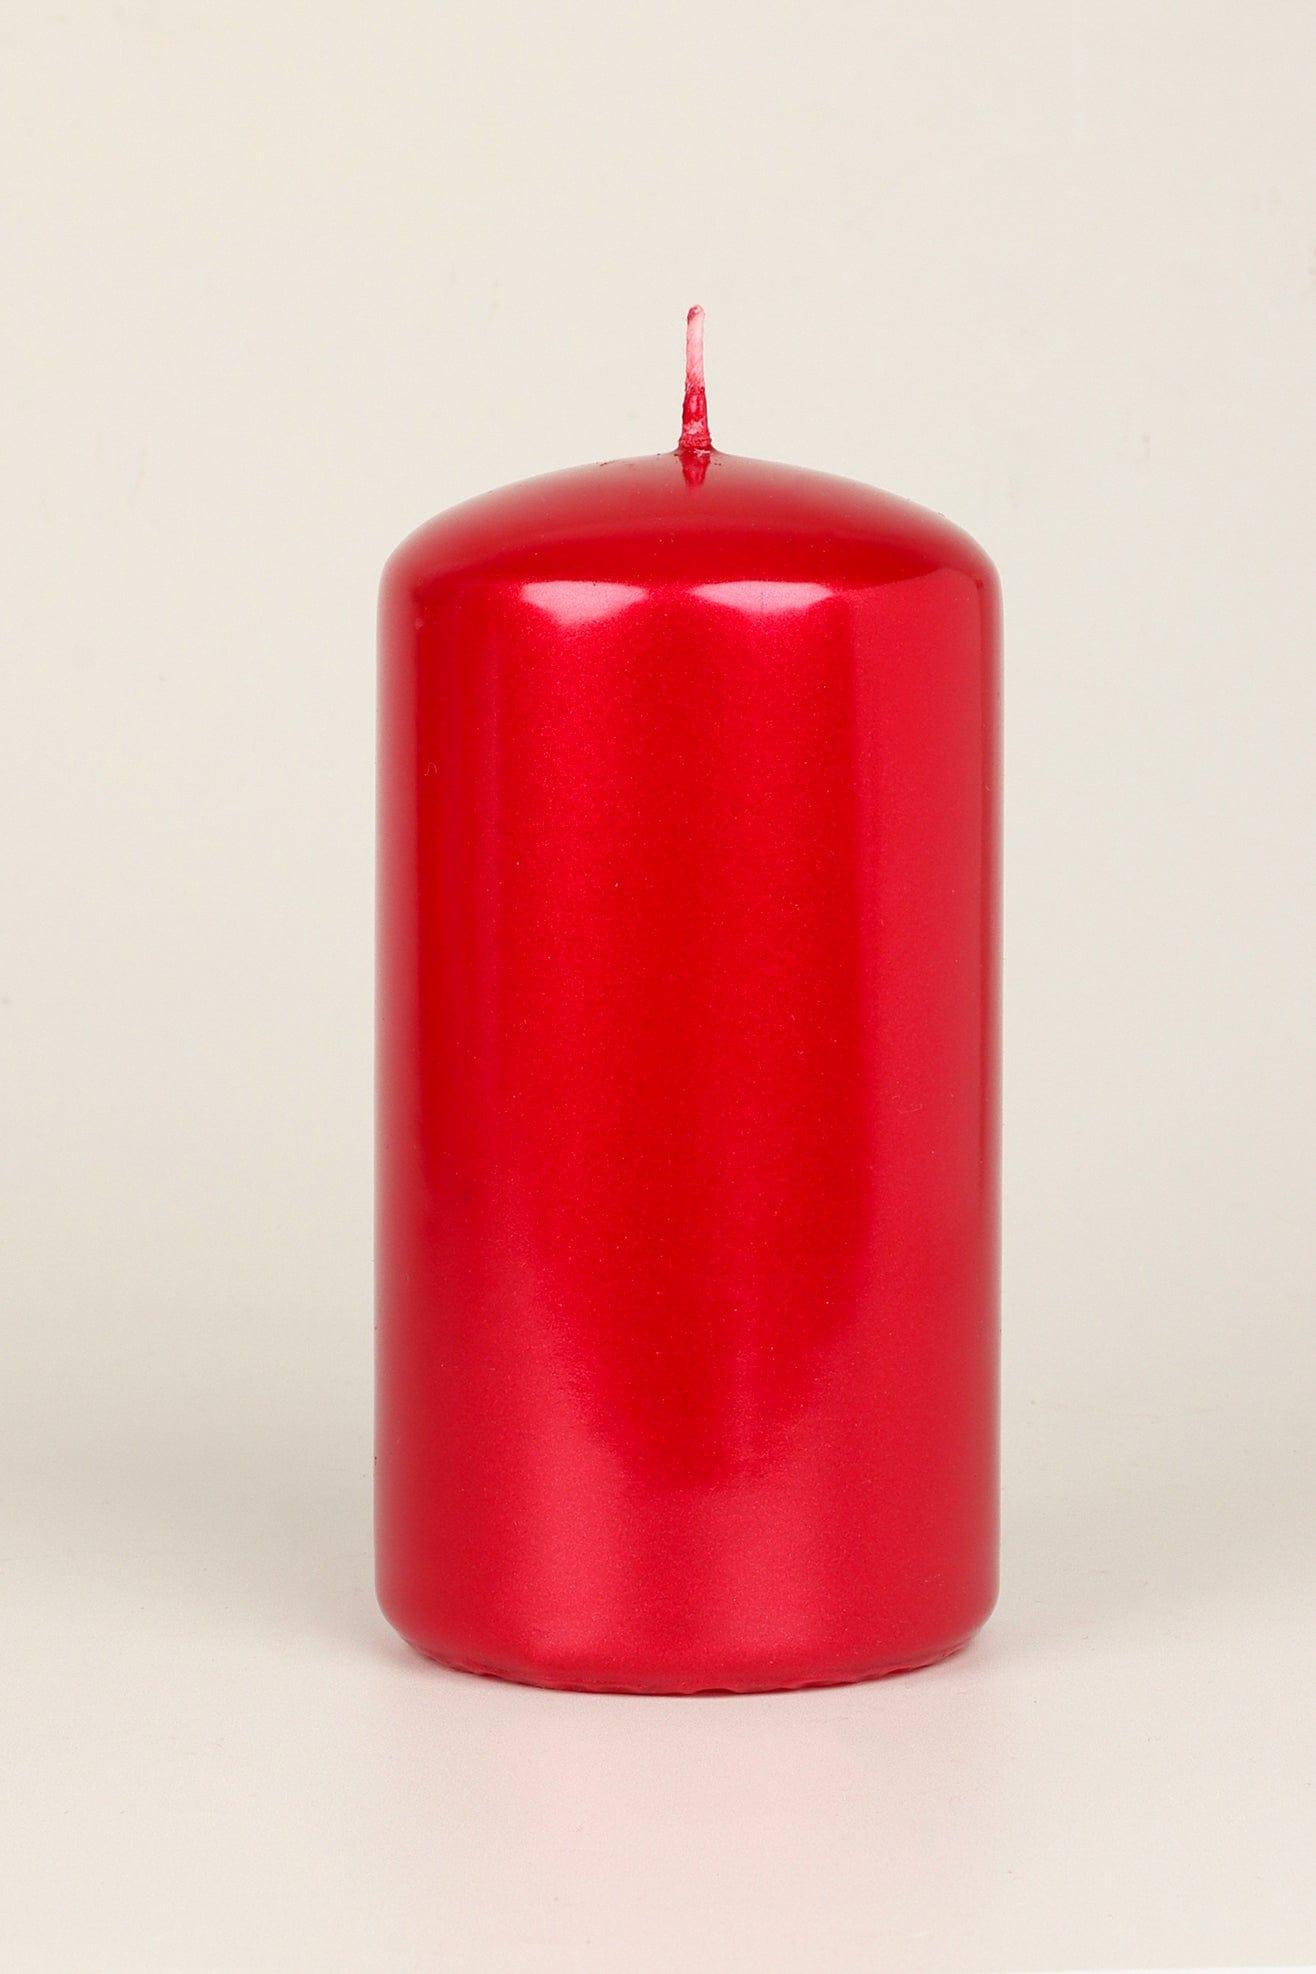 G Decor Candles & Candle Holders Red / Large Pillar Grace Scarlet Red Varnished Shimmer Metallic Shine Pillar Candle